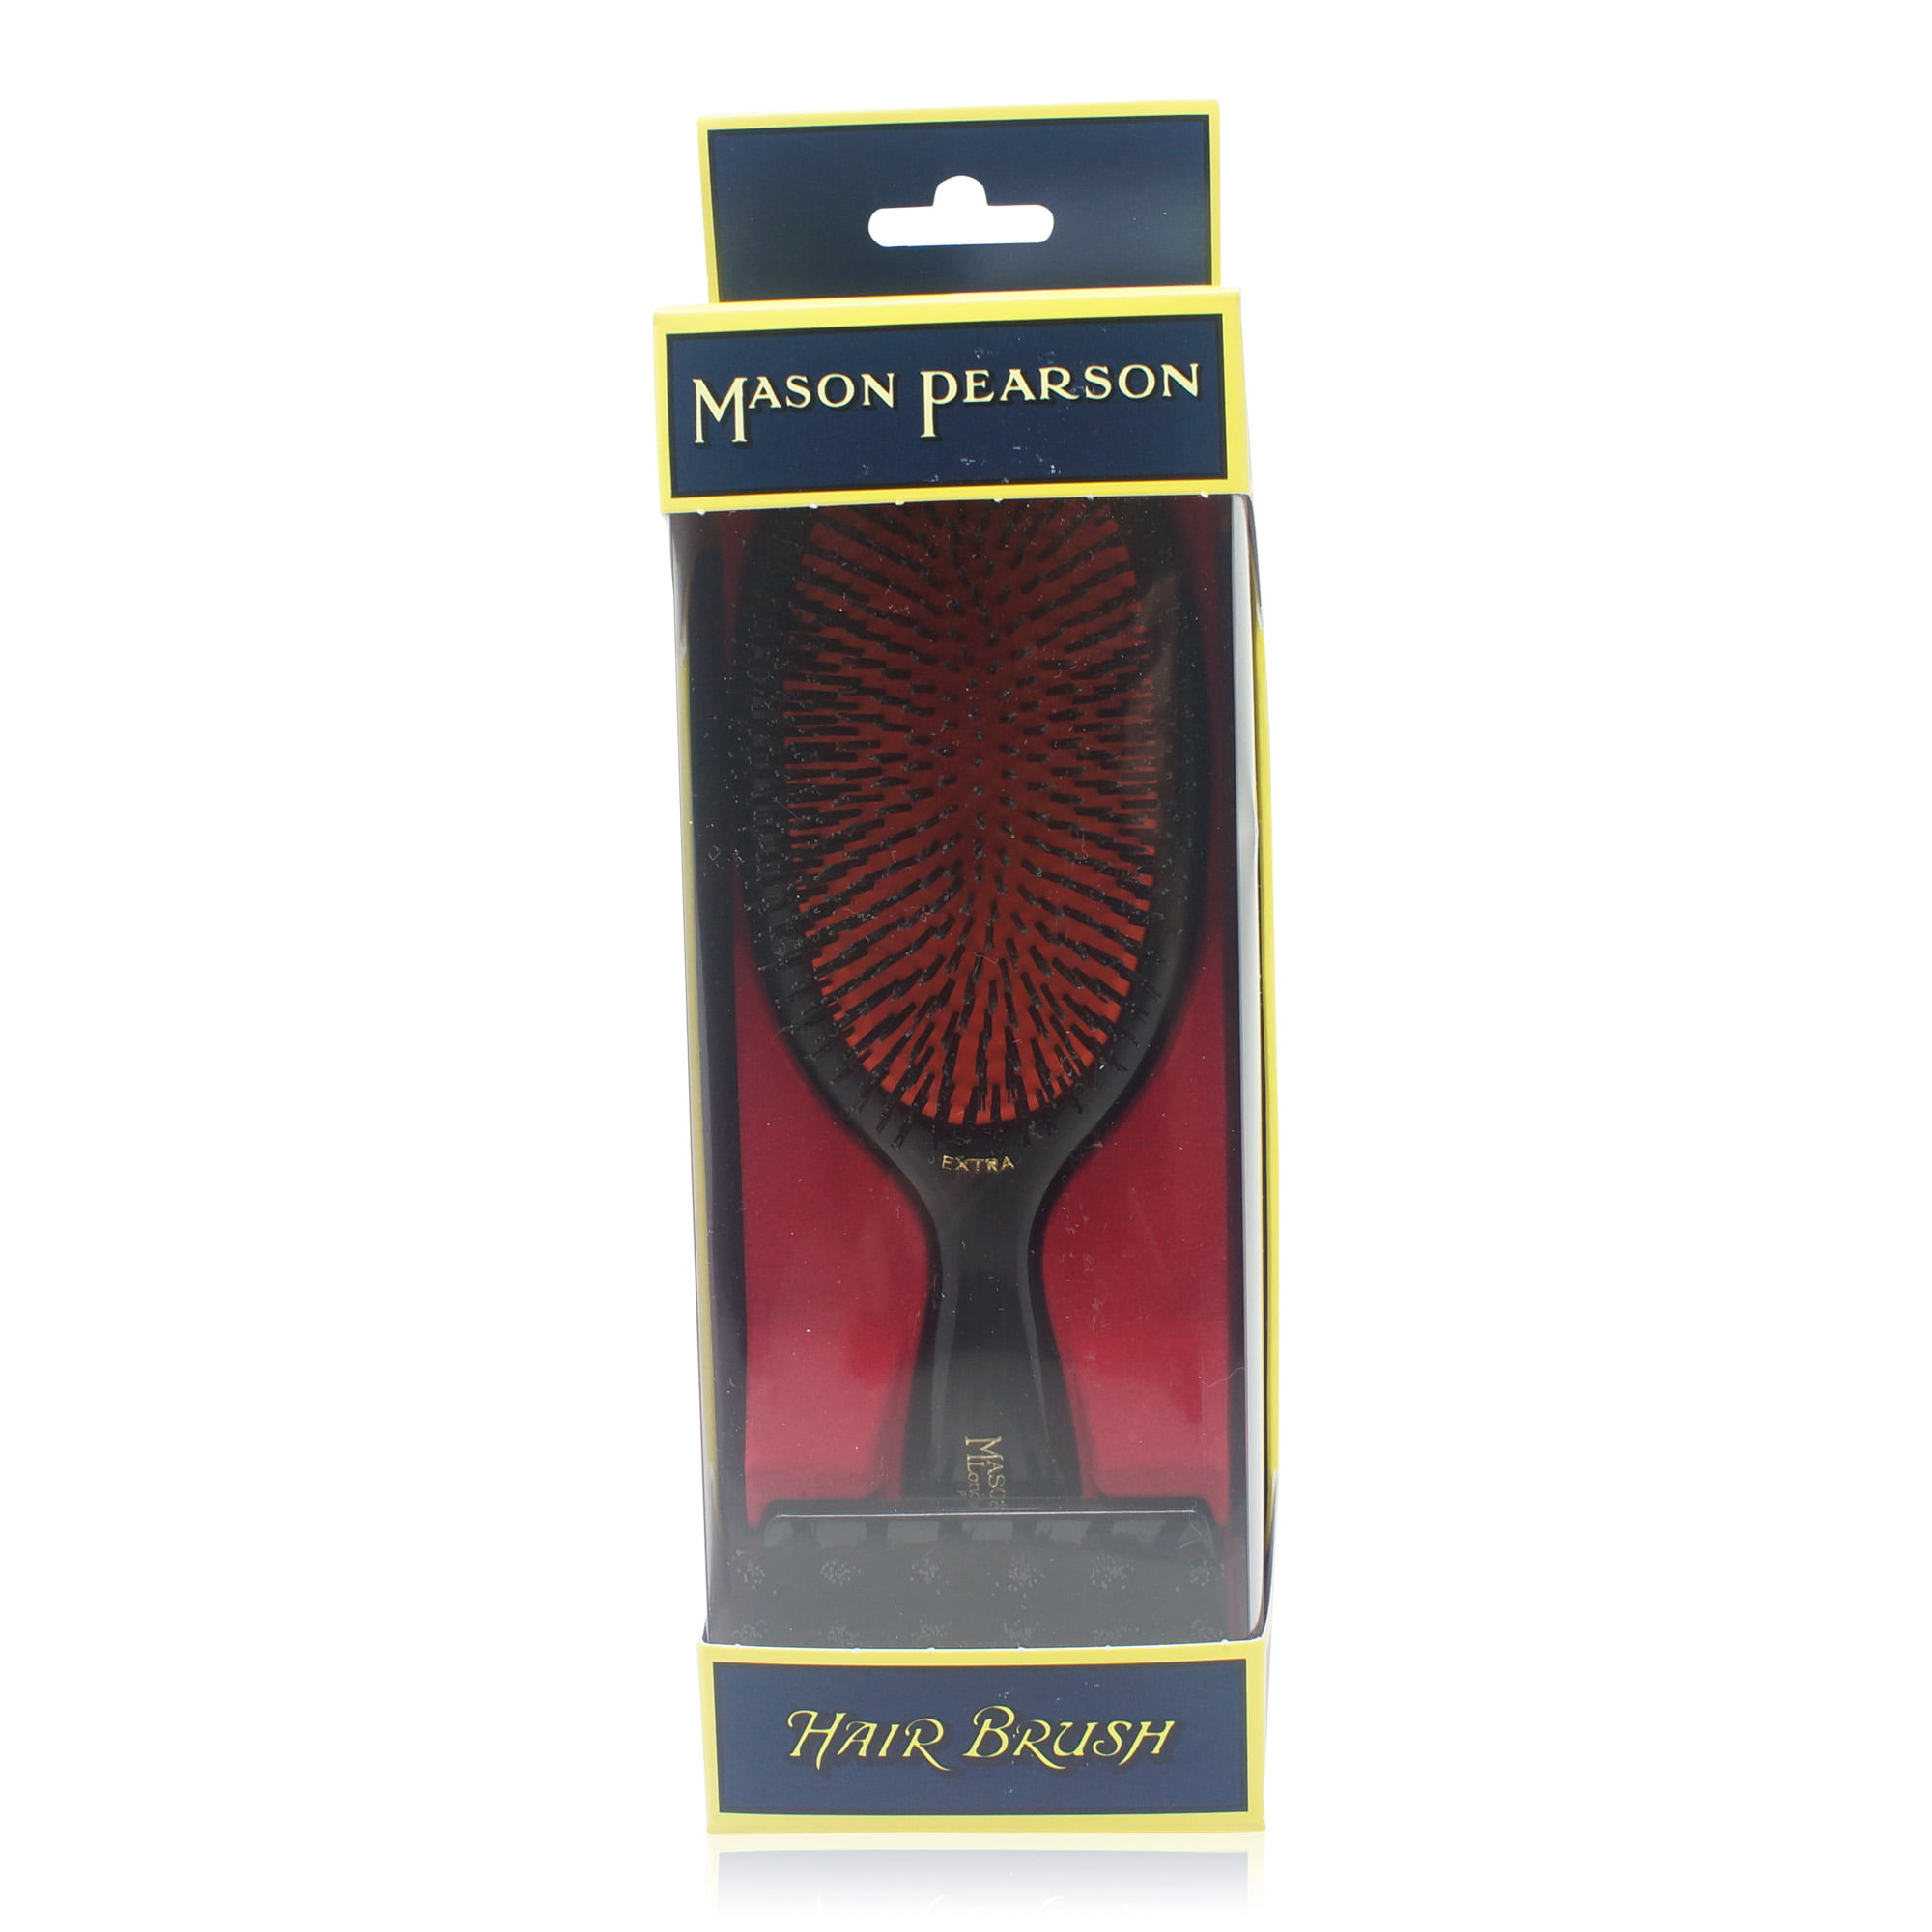 335 Value) Mason Pearson Extra Large Pure Bristle Brush with Cleaning Brush